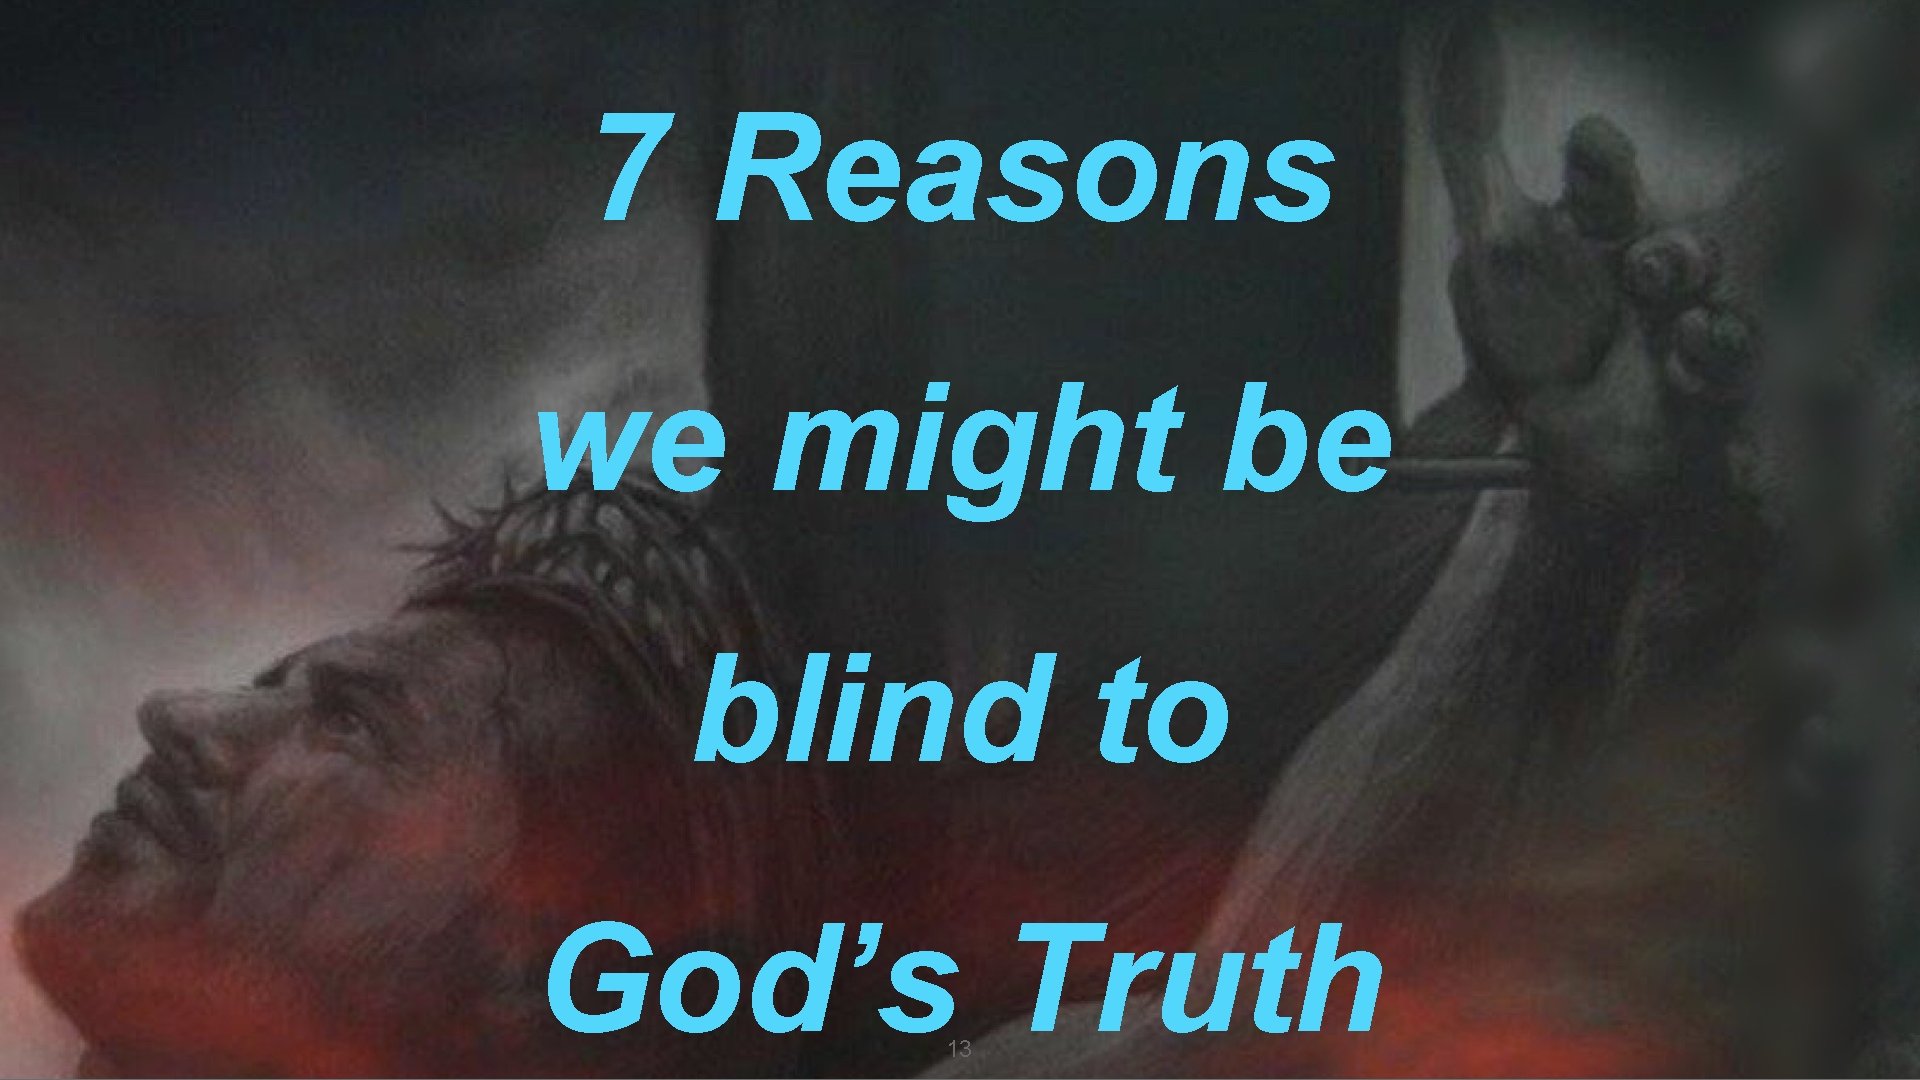 7 Reasons we might be blind to God’s Truth 13 